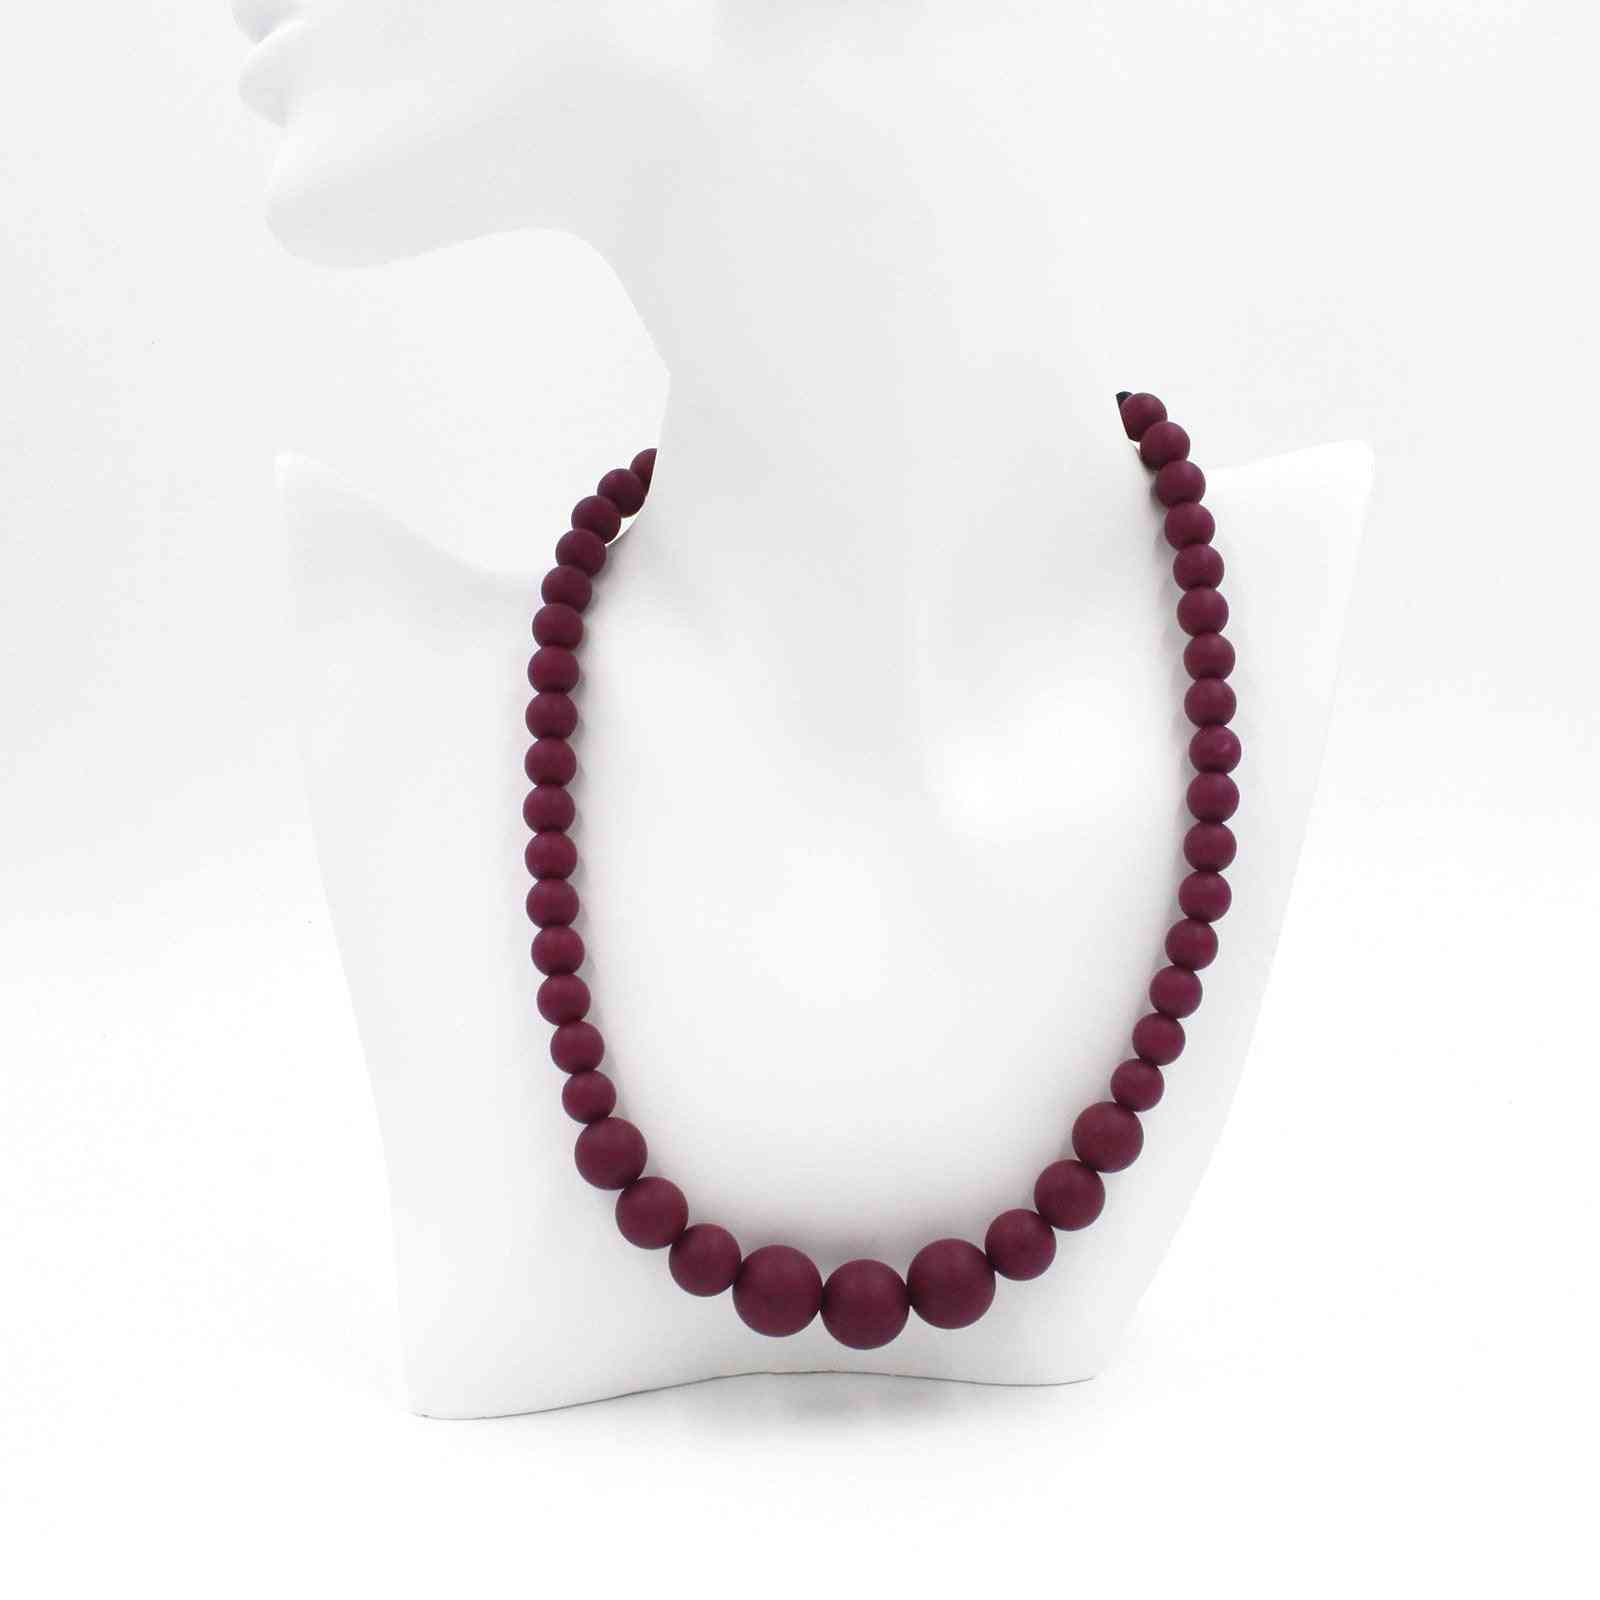 Silicon Rubber Red Wine Bead Necklace